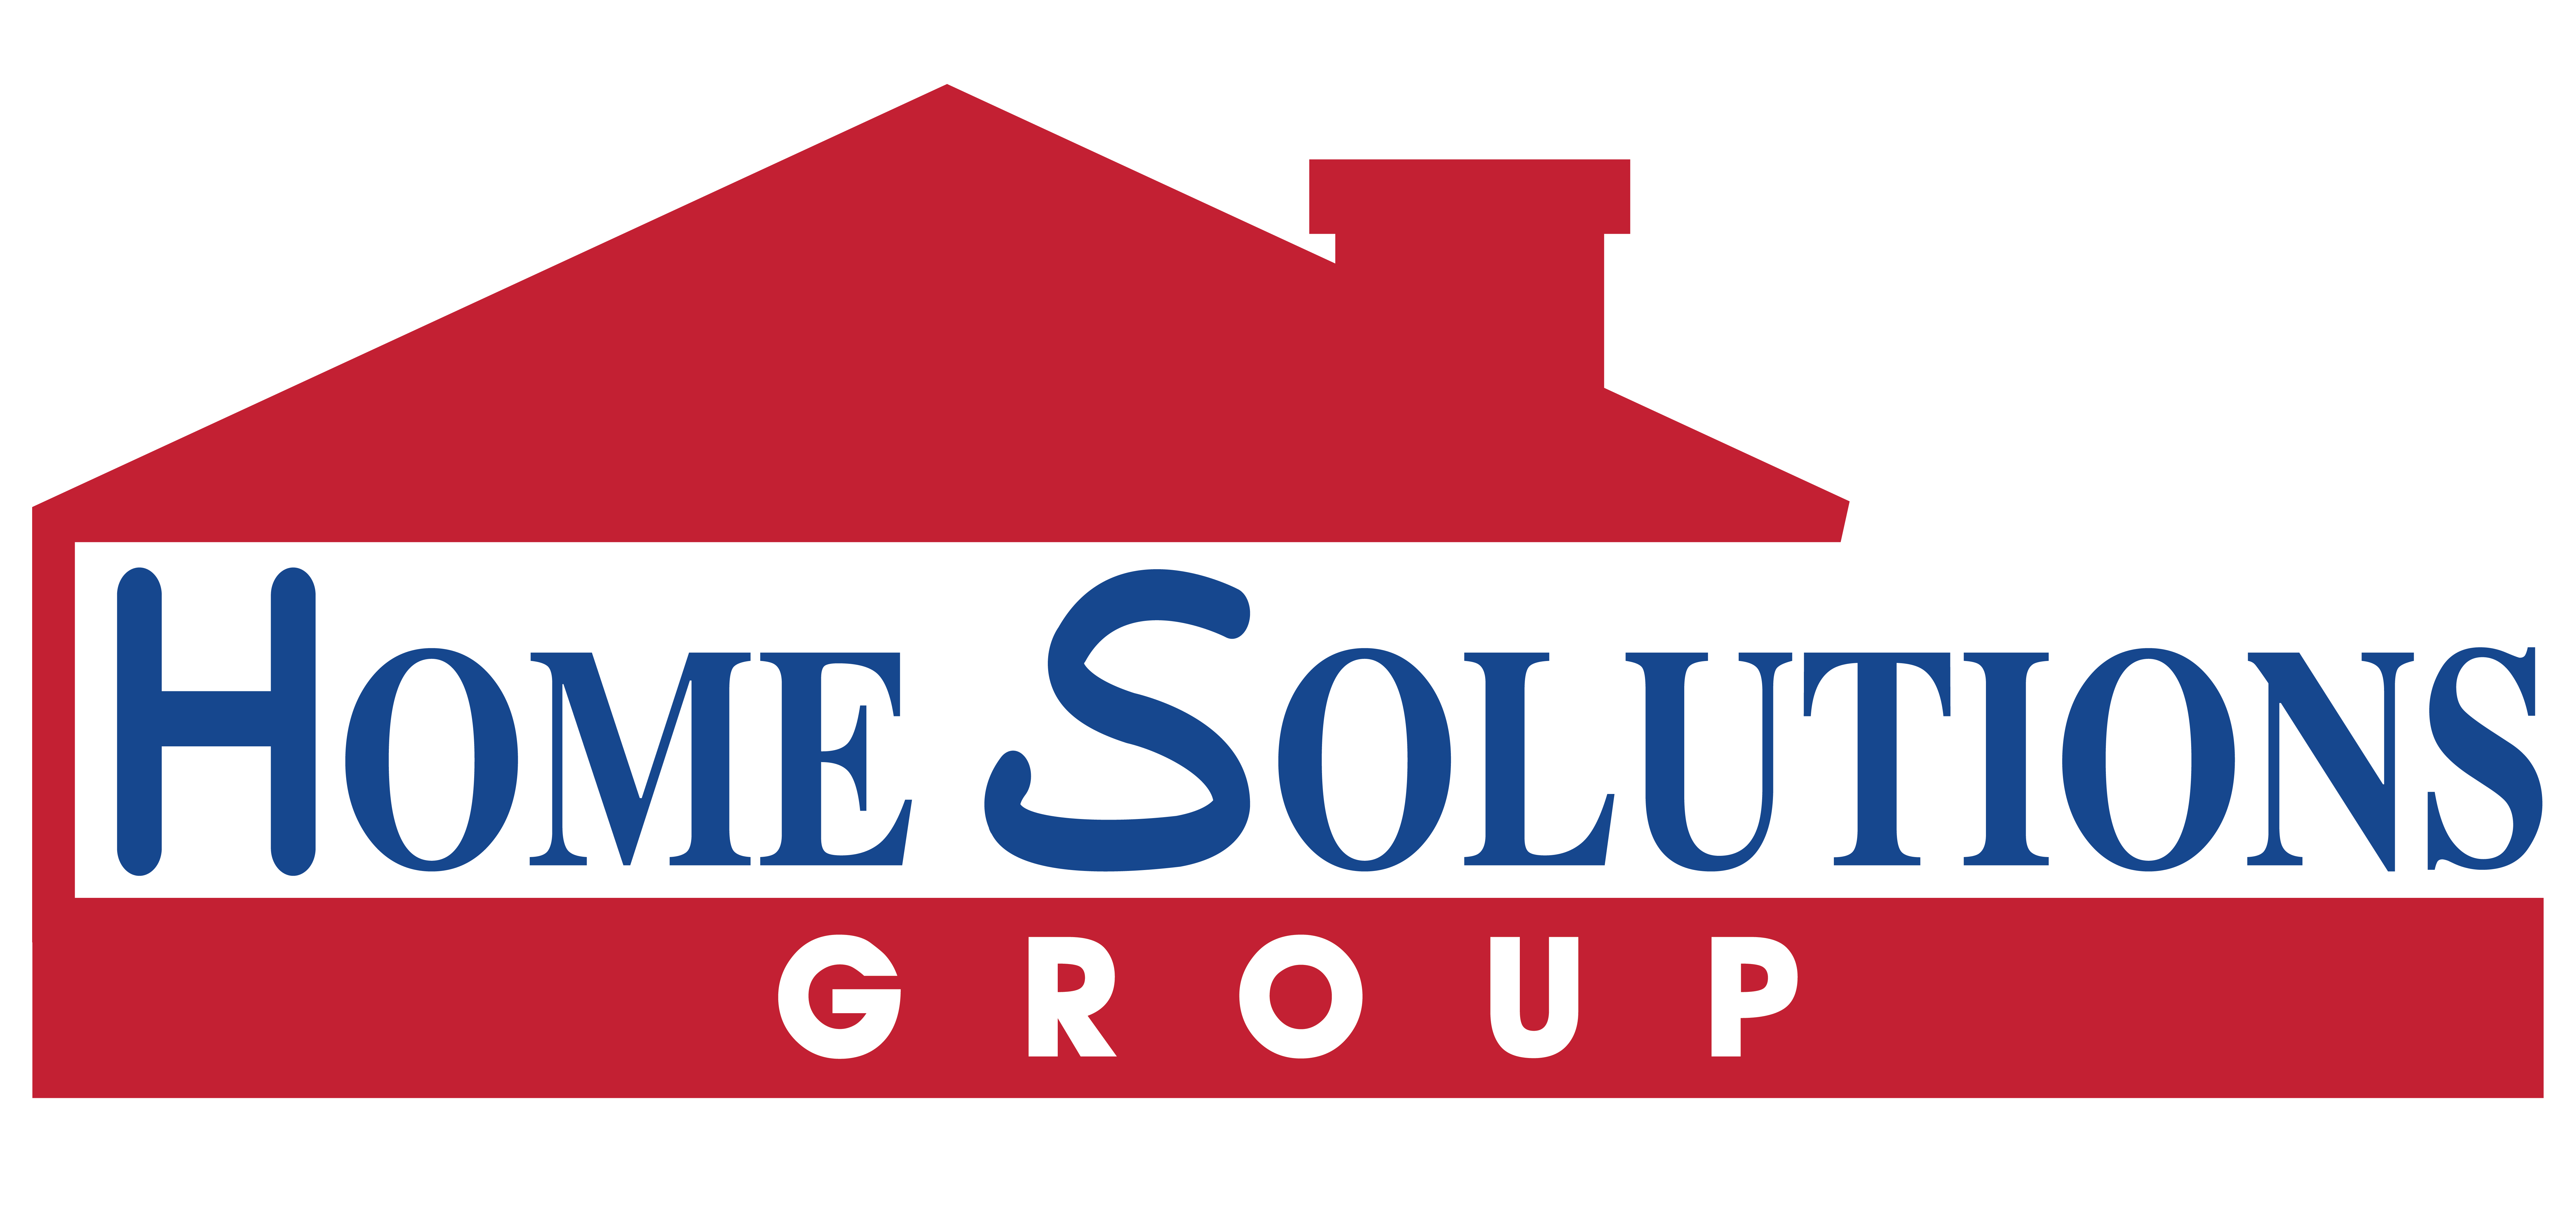 Home Solutions Group